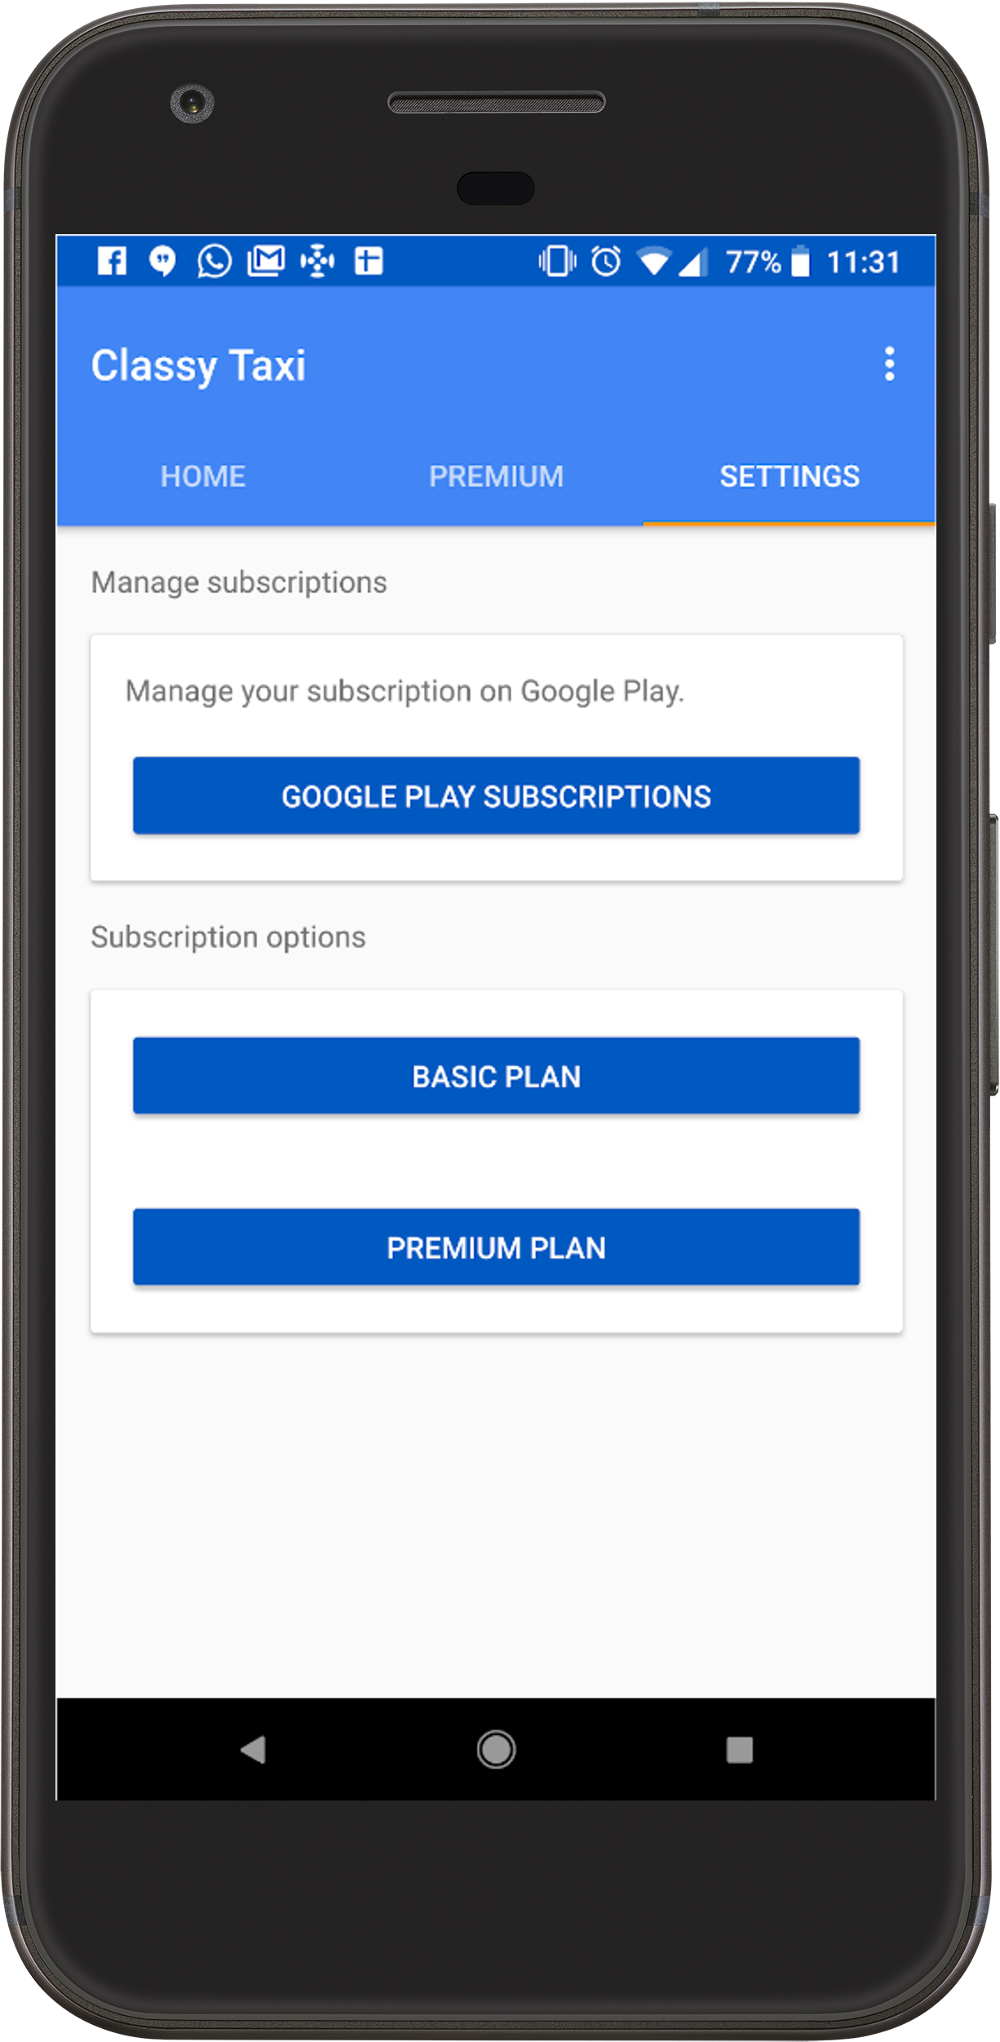 The Google Play Subscriptions button in this image is an
            example of a 'manage subscriptions' link.